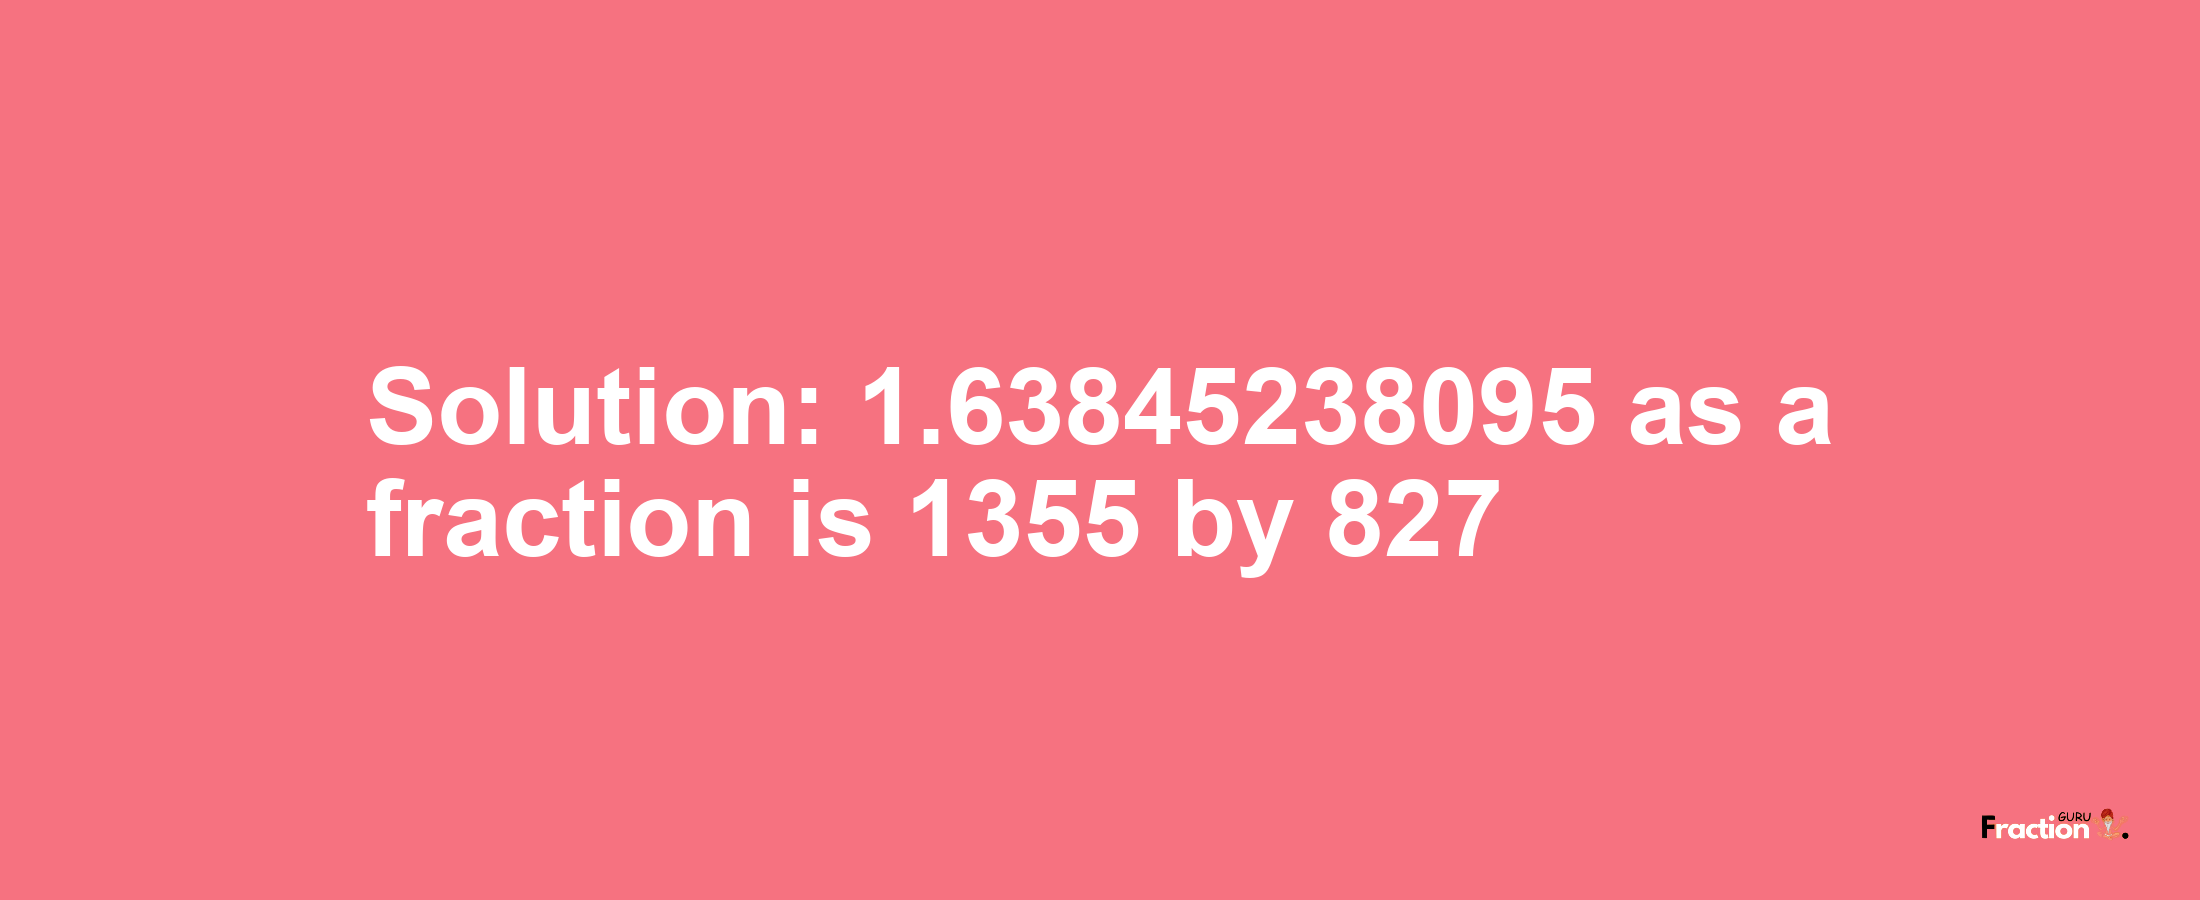 Solution:1.63845238095 as a fraction is 1355/827